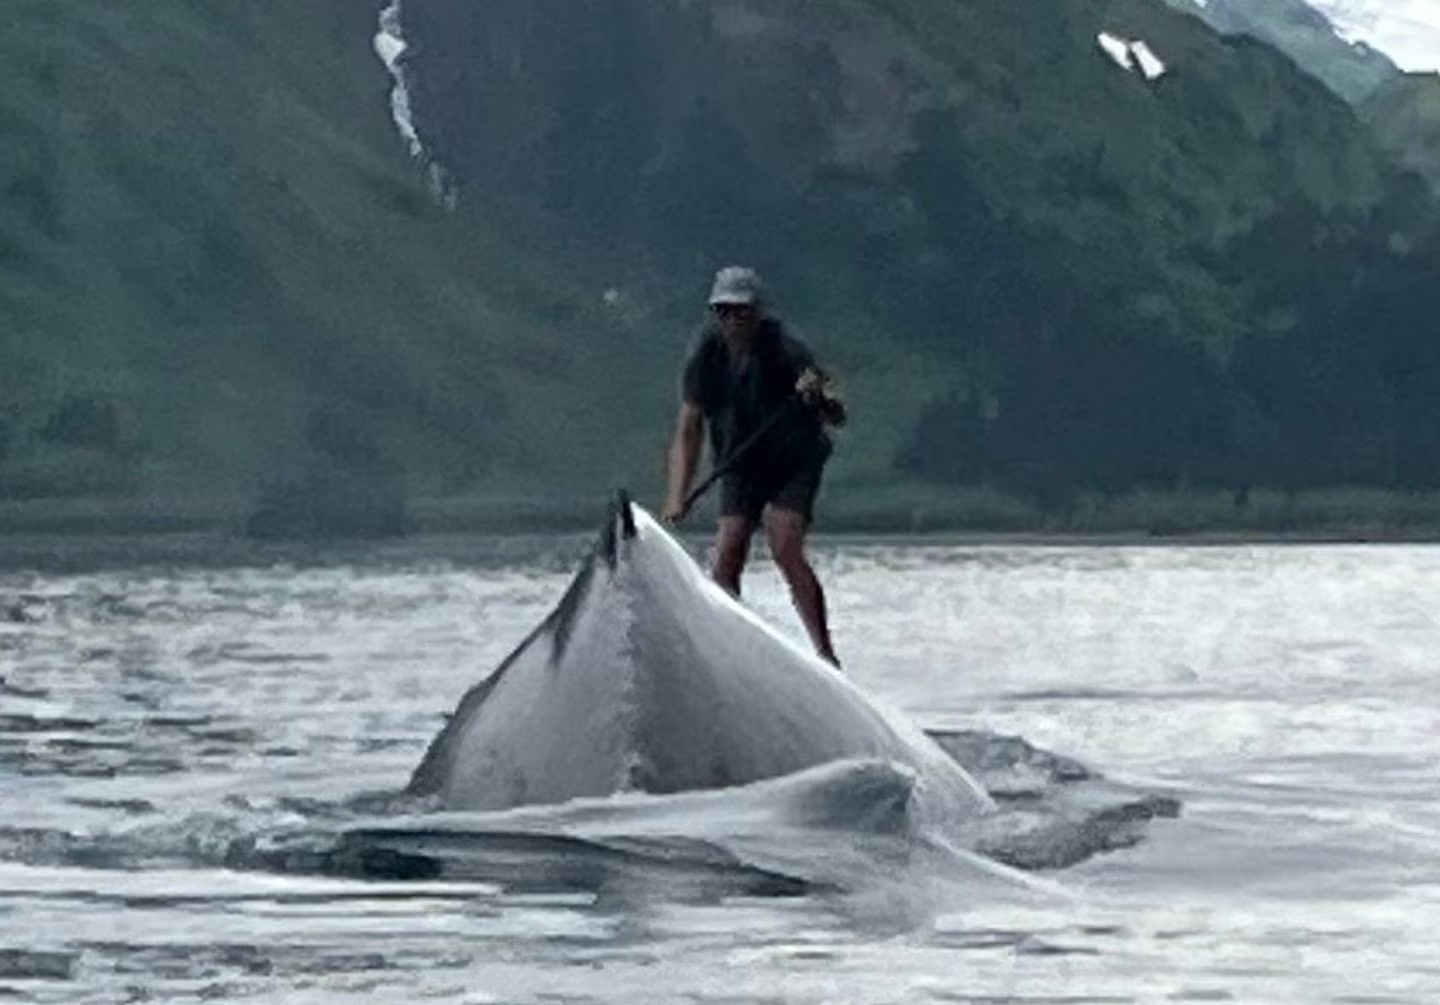 a person paddle boards in the water, near a whale